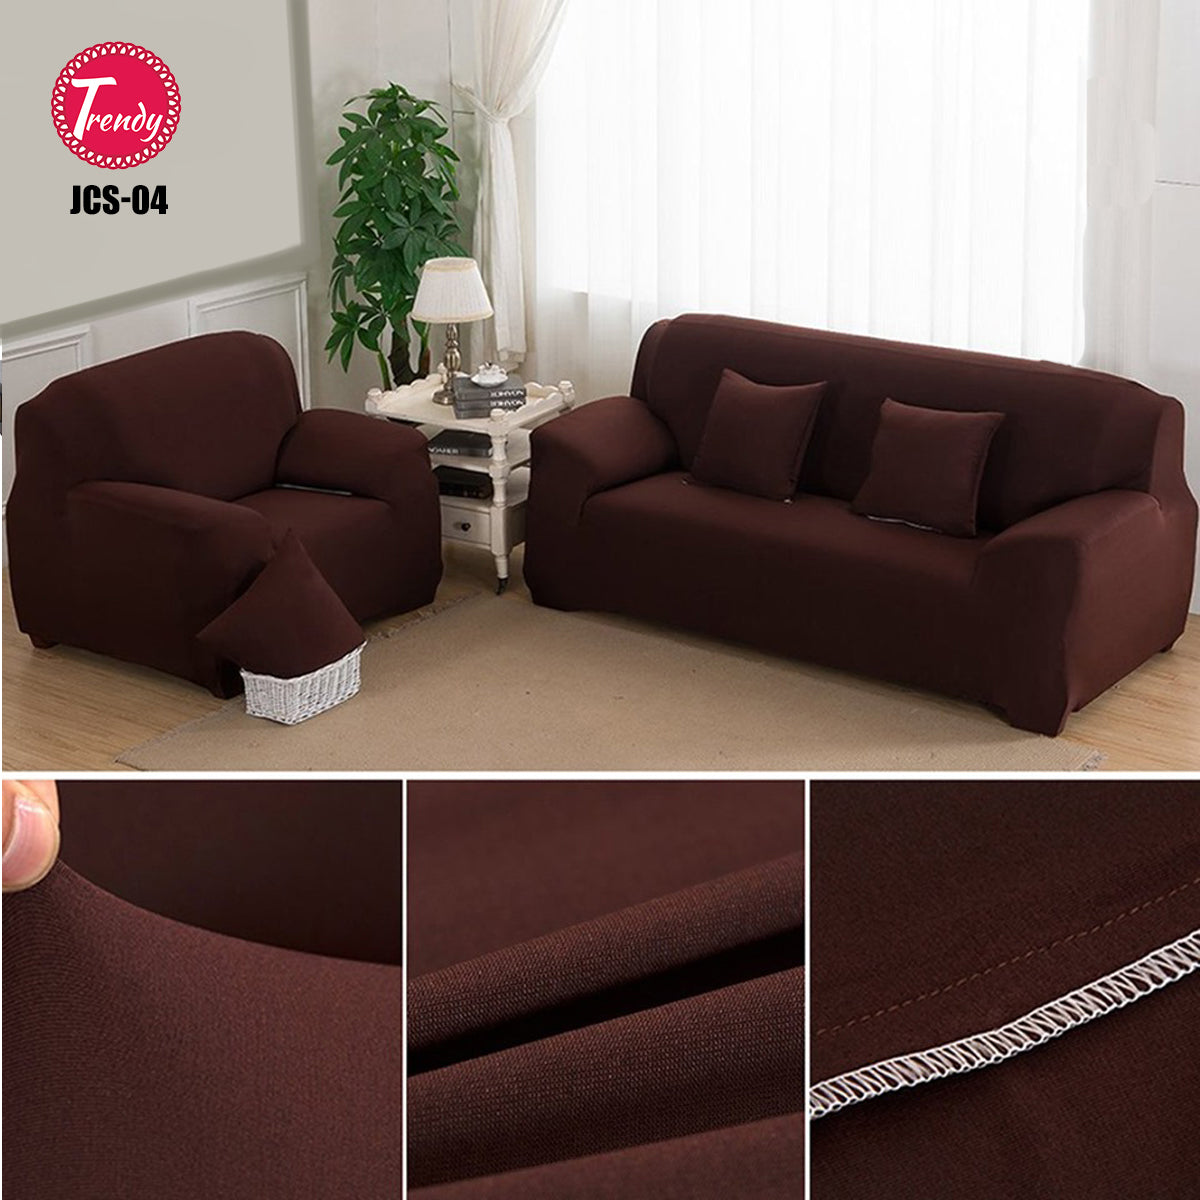 JSC-04 Jersey Fitted Sofa Cover Chocolate - Trendy Pakistan